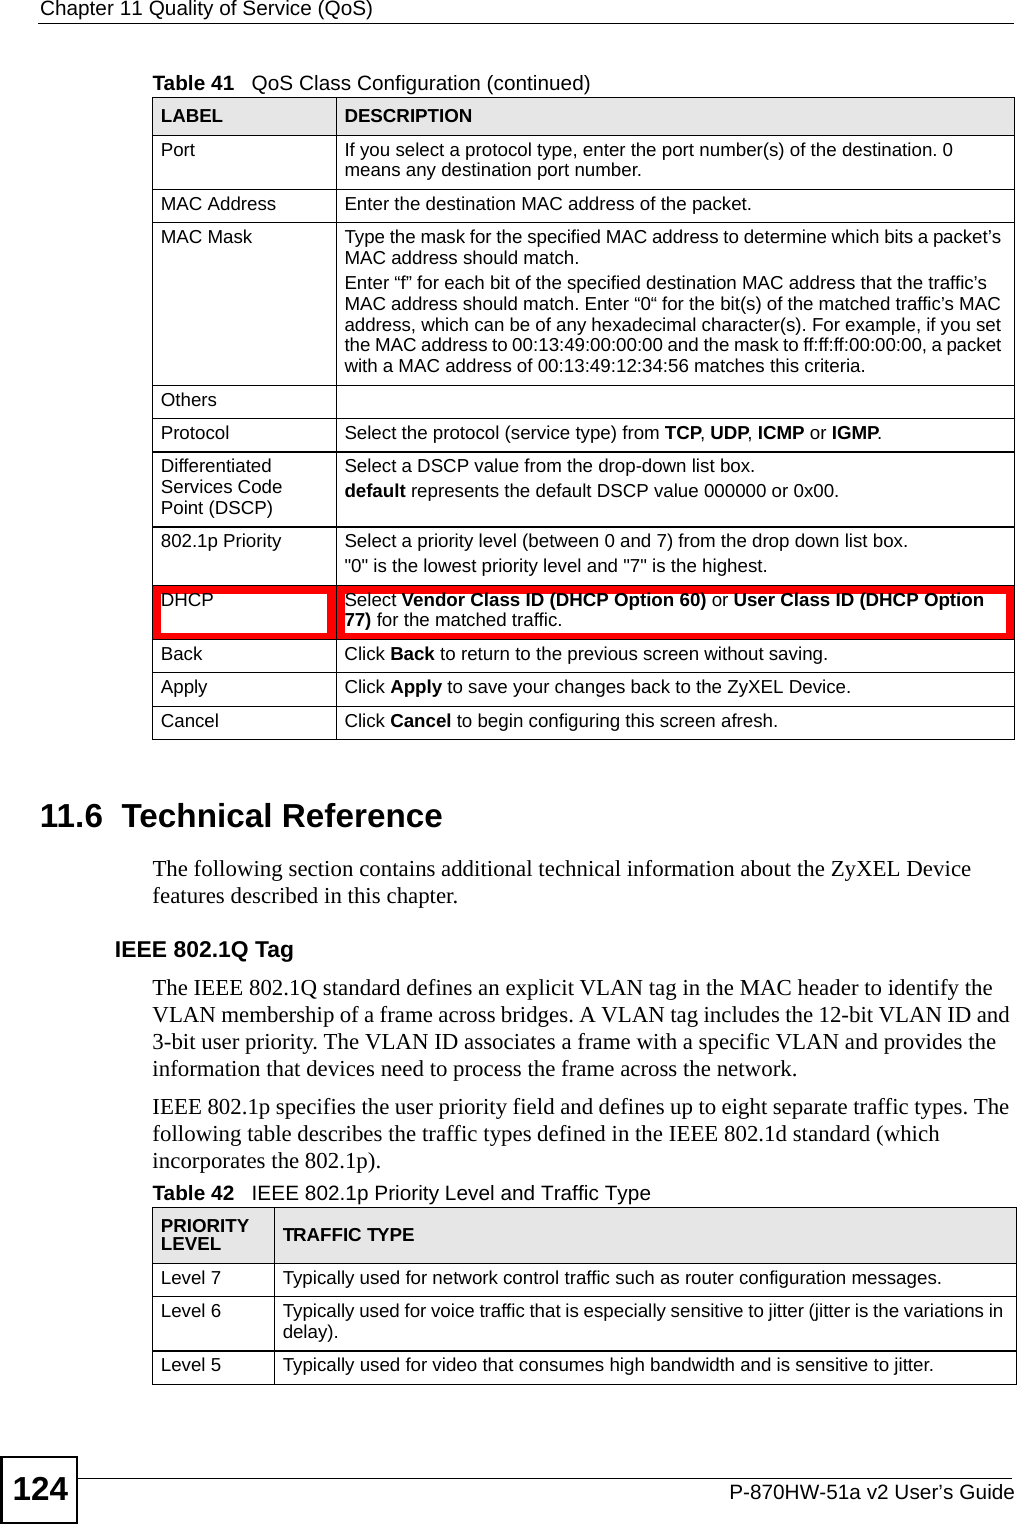 Chapter 11 Quality of Service (QoS)P-870HW-51a v2 User’s Guide12411.6  Technical ReferenceThe following section contains additional technical information about the ZyXEL Device features described in this chapter.IEEE 802.1Q TagThe IEEE 802.1Q standard defines an explicit VLAN tag in the MAC header to identify the VLAN membership of a frame across bridges. A VLAN tag includes the 12-bit VLAN ID and 3-bit user priority. The VLAN ID associates a frame with a specific VLAN and provides the information that devices need to process the frame across the network. IEEE 802.1p specifies the user priority field and defines up to eight separate traffic types. The following table describes the traffic types defined in the IEEE 802.1d standard (which incorporates the 802.1p).  Port  If you select a protocol type, enter the port number(s) of the destination. 0 means any destination port number.MAC Address Enter the destination MAC address of the packet.MAC Mask Type the mask for the specified MAC address to determine which bits a packet’s MAC address should match. Enter “f” for each bit of the specified destination MAC address that the traffic’s MAC address should match. Enter “0“ for the bit(s) of the matched traffic’s MAC address, which can be of any hexadecimal character(s). For example, if you set the MAC address to 00:13:49:00:00:00 and the mask to ff:ff:ff:00:00:00, a packet with a MAC address of 00:13:49:12:34:56 matches this criteria.OthersProtocol Select the protocol (service type) from TCP, UDP, ICMP or IGMP.Differentiated Services Code Point (DSCP)Select a DSCP value from the drop-down list box. default represents the default DSCP value 000000 or 0x00.802.1p Priority  Select a priority level (between 0 and 7) from the drop down list box.&quot;0&quot; is the lowest priority level and &quot;7&quot; is the highest.DHCP Select Vendor Class ID (DHCP Option 60) or User Class ID (DHCP Option 77) for the matched traffic.Back Click Back to return to the previous screen without saving.Apply Click Apply to save your changes back to the ZyXEL Device.Cancel Click Cancel to begin configuring this screen afresh.Table 41   QoS Class Configuration (continued)LABEL DESCRIPTIONTable 42   IEEE 802.1p Priority Level and Traffic TypePRIORITY  LEVEL TRAFFIC TYPELevel 7 Typically used for network control traffic such as router configuration messages.Level 6 Typically used for voice traffic that is especially sensitive to jitter (jitter is the variations in delay).Level 5 Typically used for video that consumes high bandwidth and is sensitive to jitter.